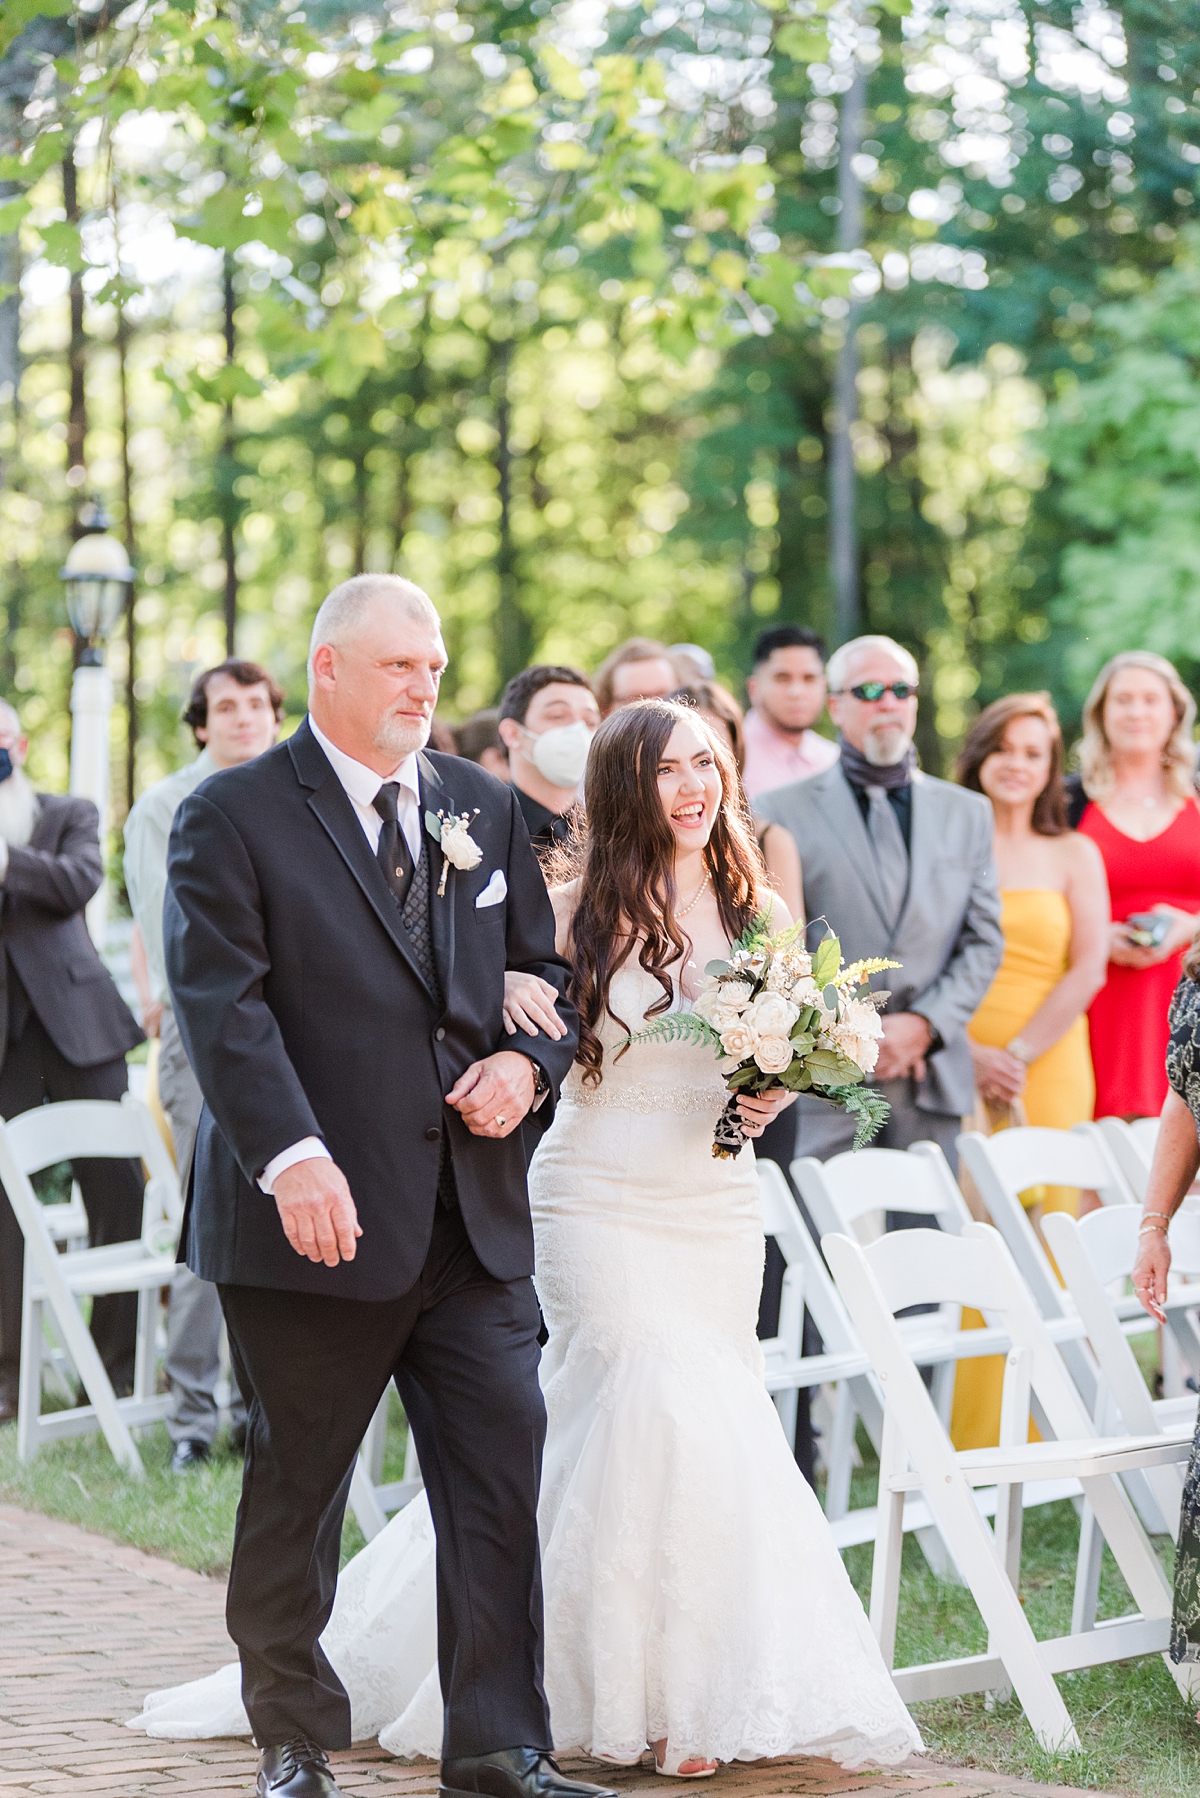 Bride Walking Down the Aisle at Virginia Cliffe Inn Summer Wedding Ceremony. Wedding Photography by Richmond Wedding Photographer Kailey Brianne Photography. 